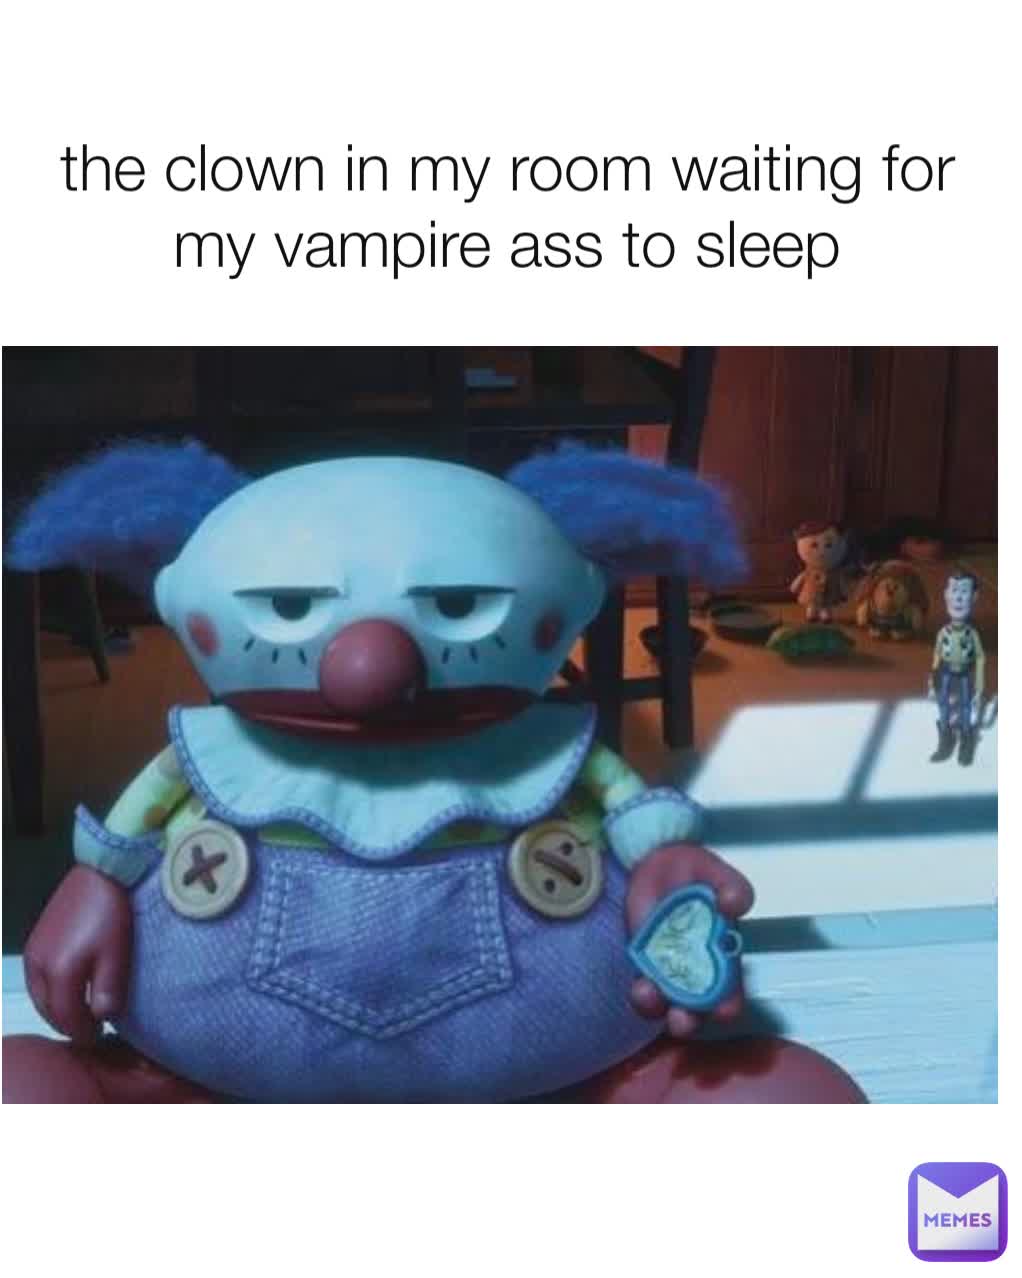 the clown in my room waiting for my vampire ass to sleep